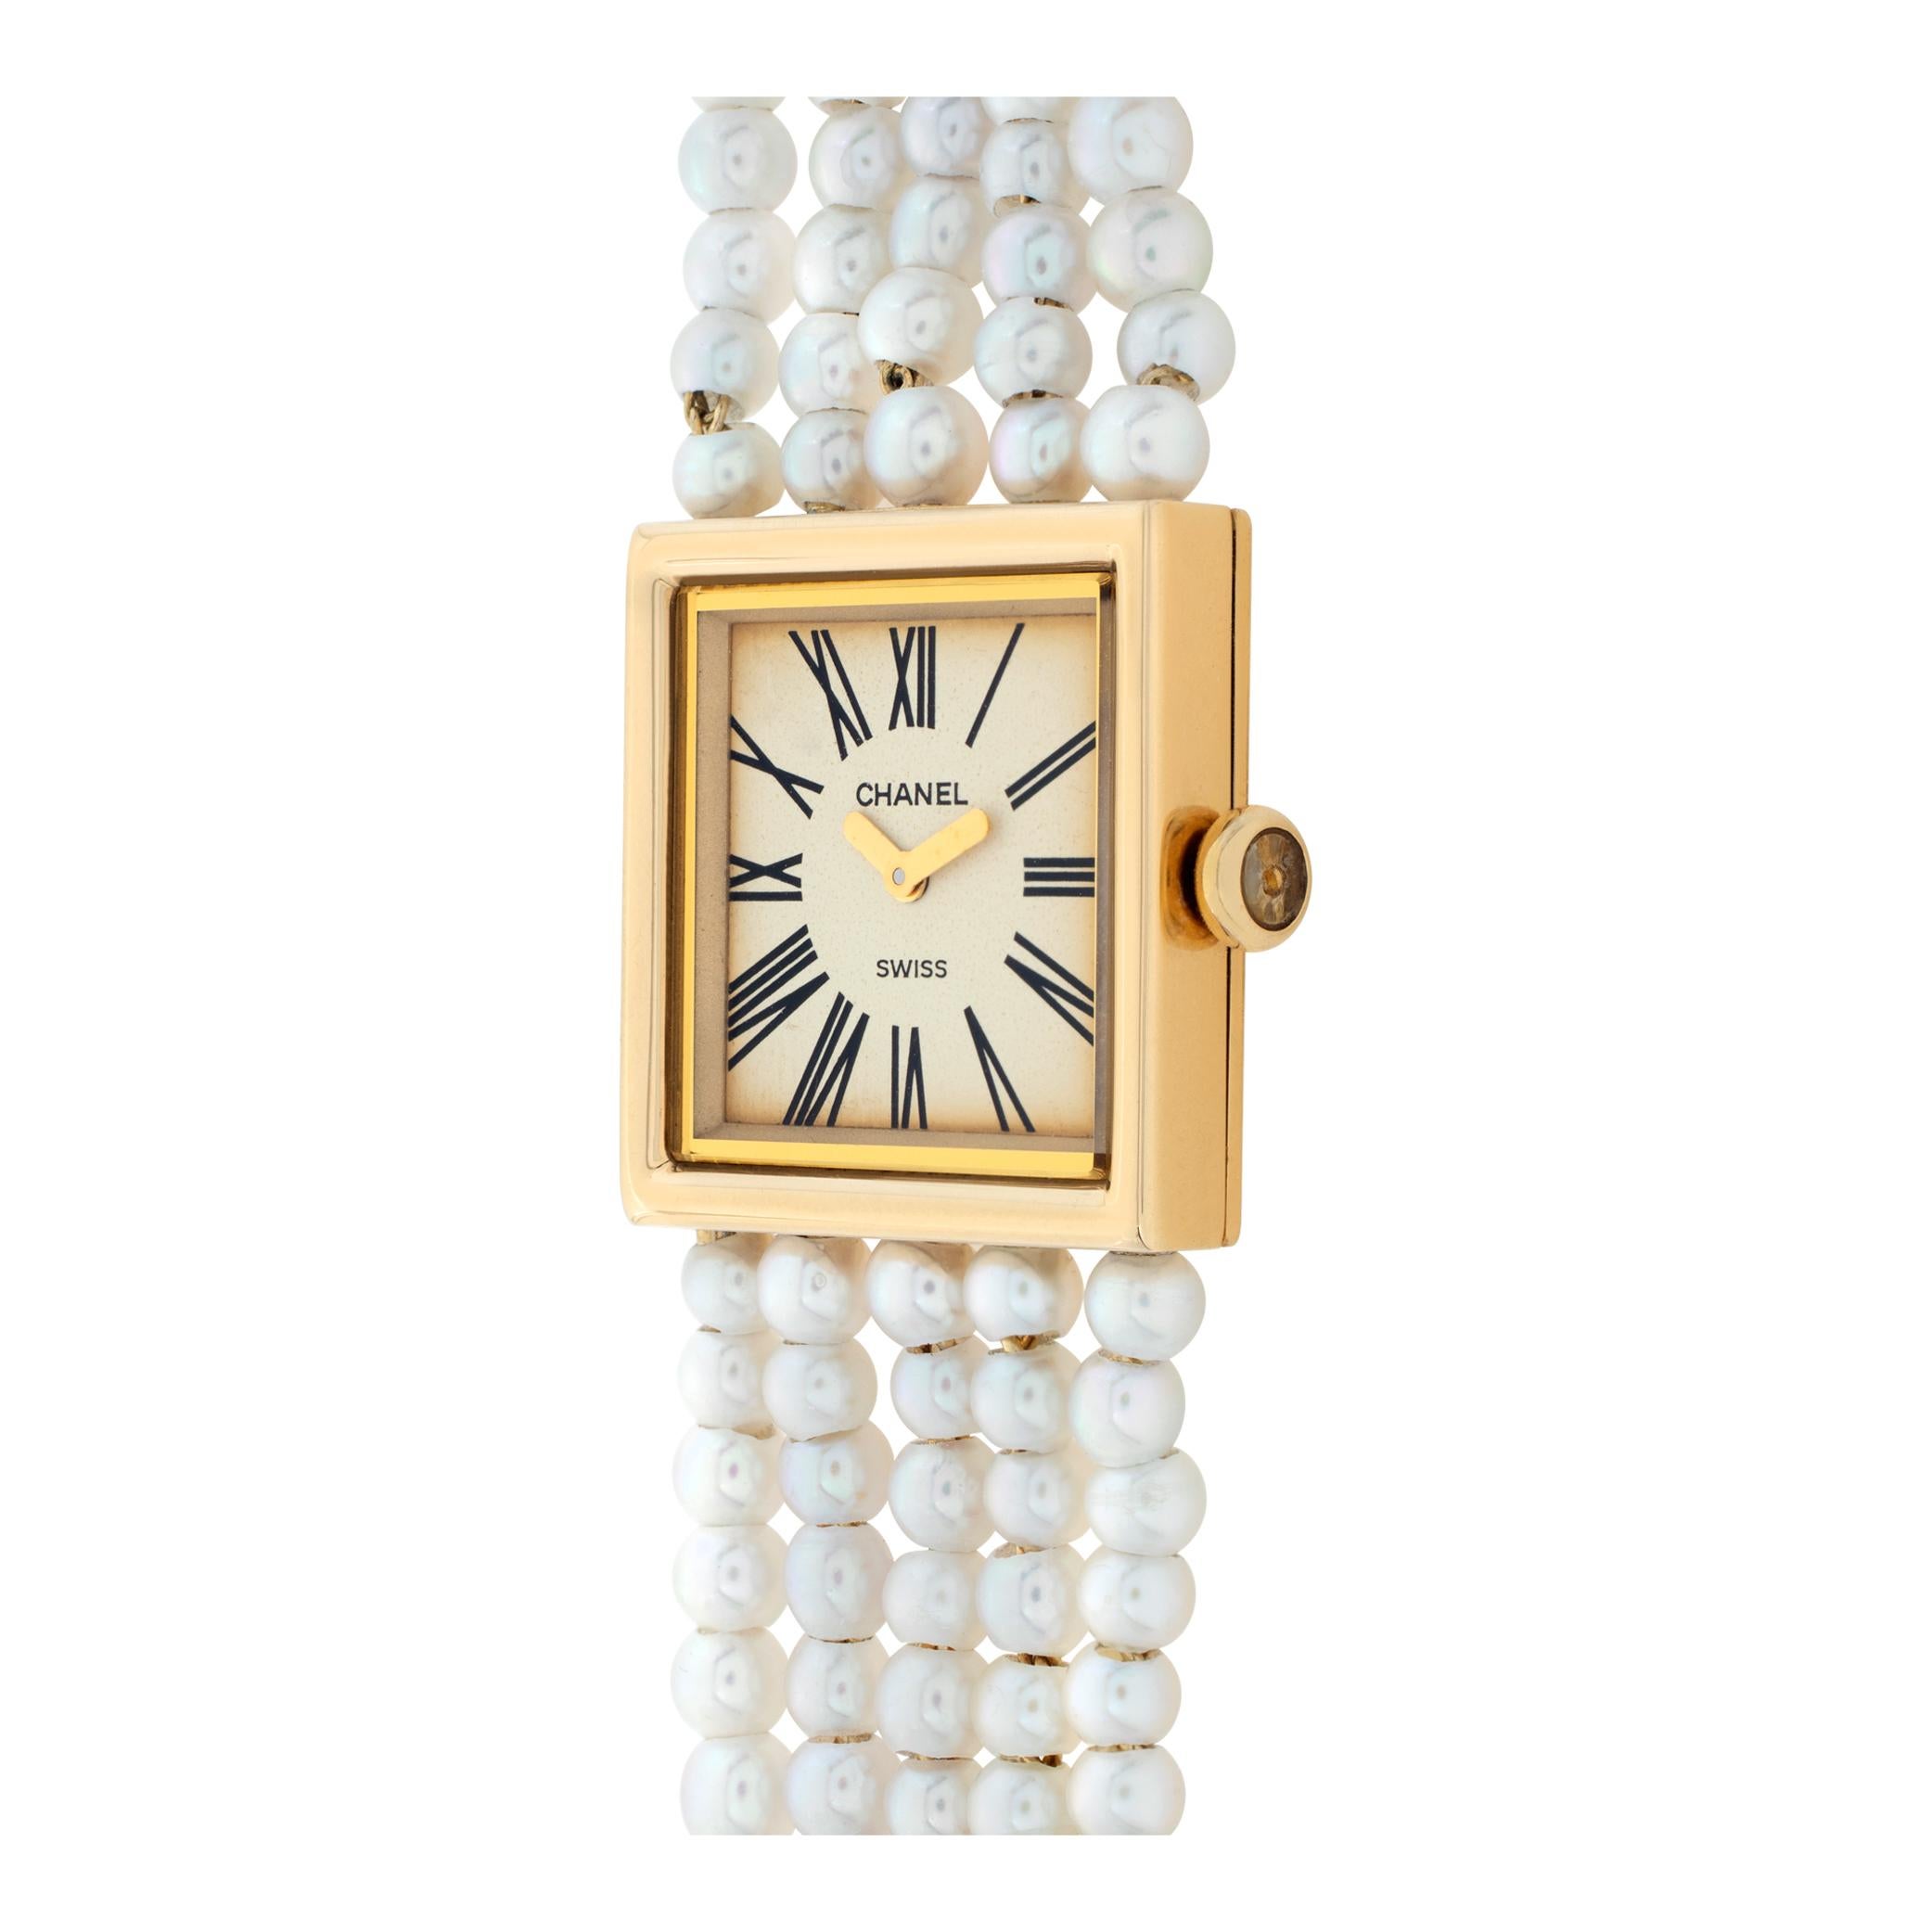 Chanel Mademoiselle 18k yellow gold Quartz Wristwatch Ref h0007 In Excellent Condition For Sale In Surfside, FL